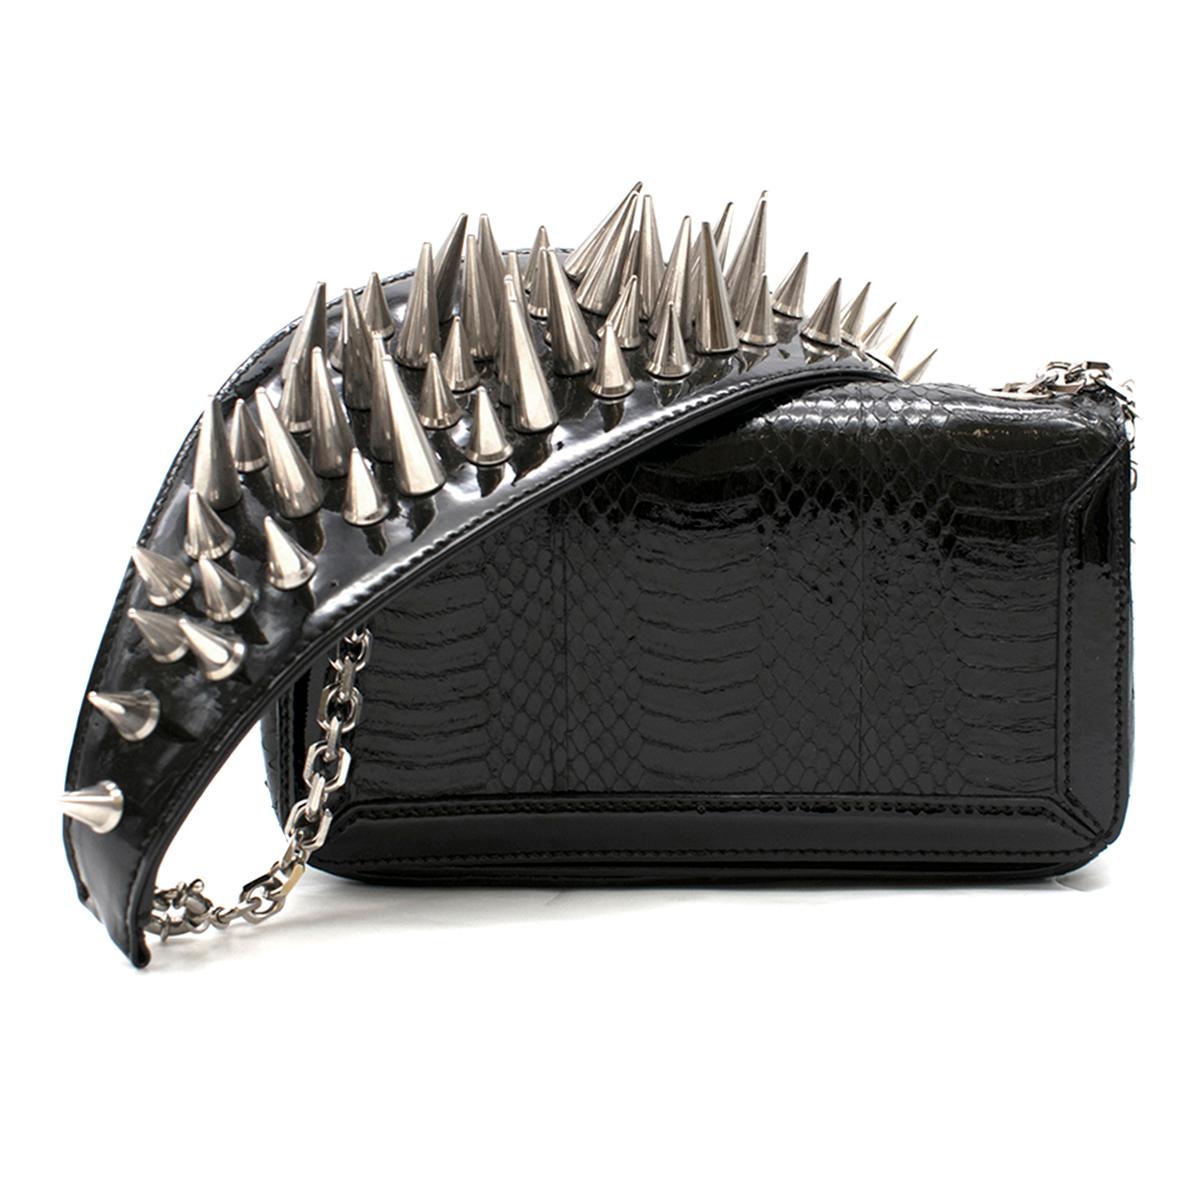 Christian Louboutin Black Leather Artemis Spike Stud Python Bag

- Mini black leather python shoulder bag
- Spike-studded patent leather shoulder strap with a silver-tone chain detail
- Front flap with push button and patent leather trimming
-